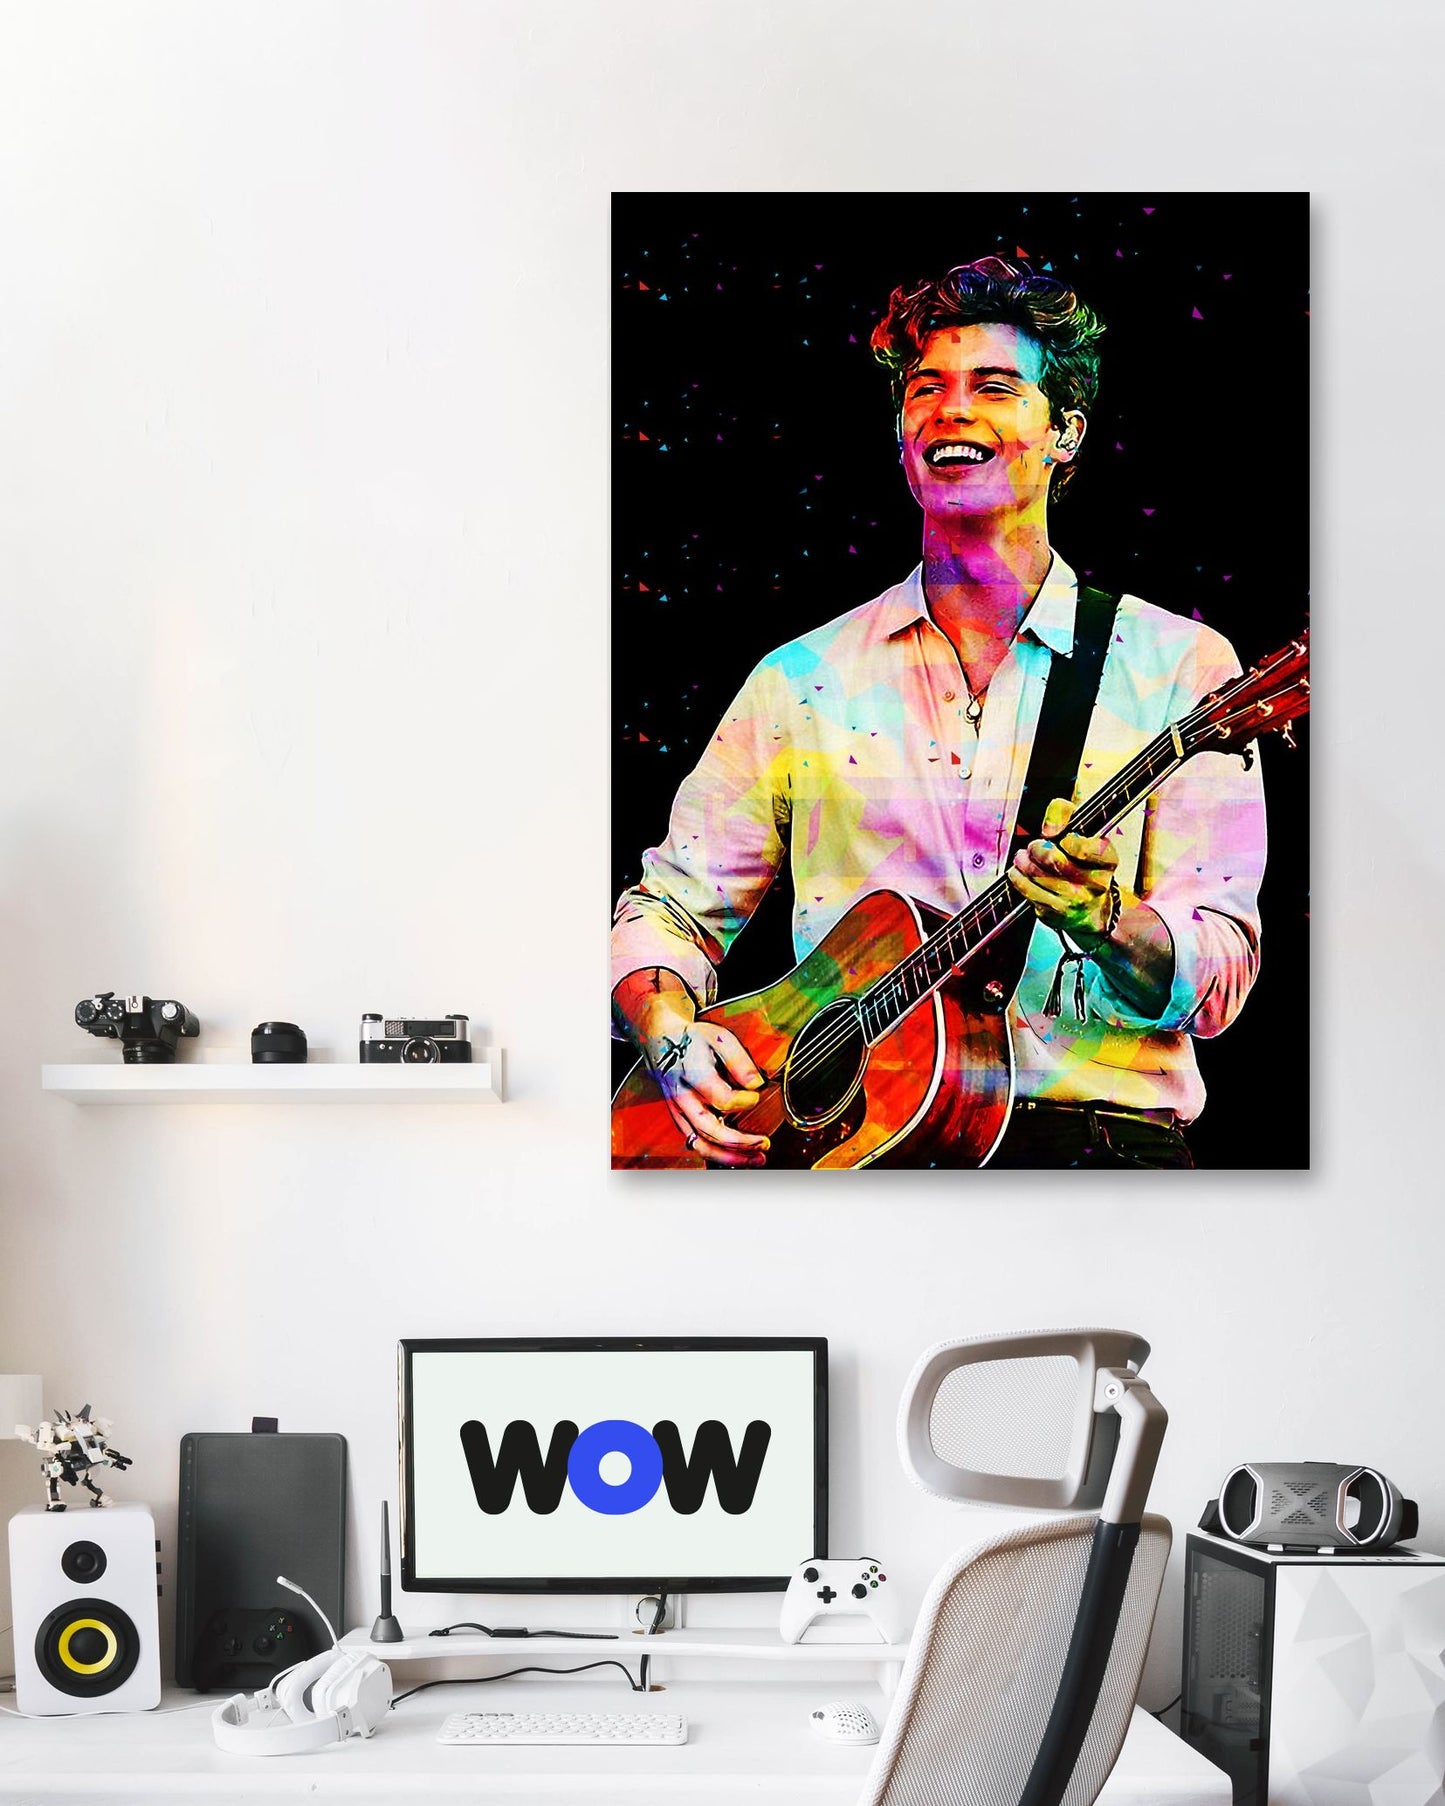 Shawn mendes poster - @ColorfulArt